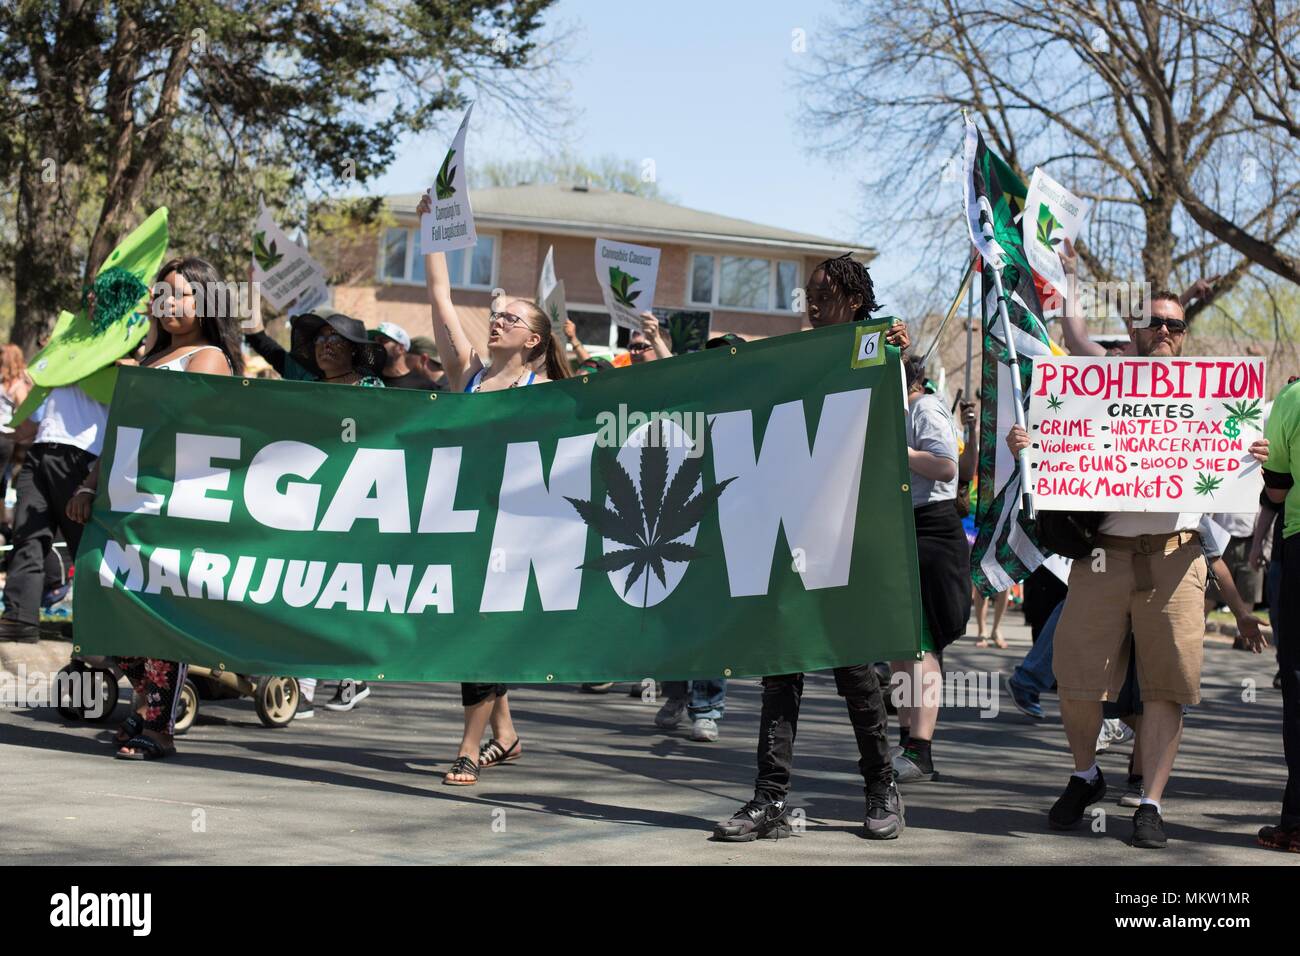 A group demanding the legalization of marijuana at the May Day parade and festival in Minneapolis, Minnesota, USA. Stock Photo